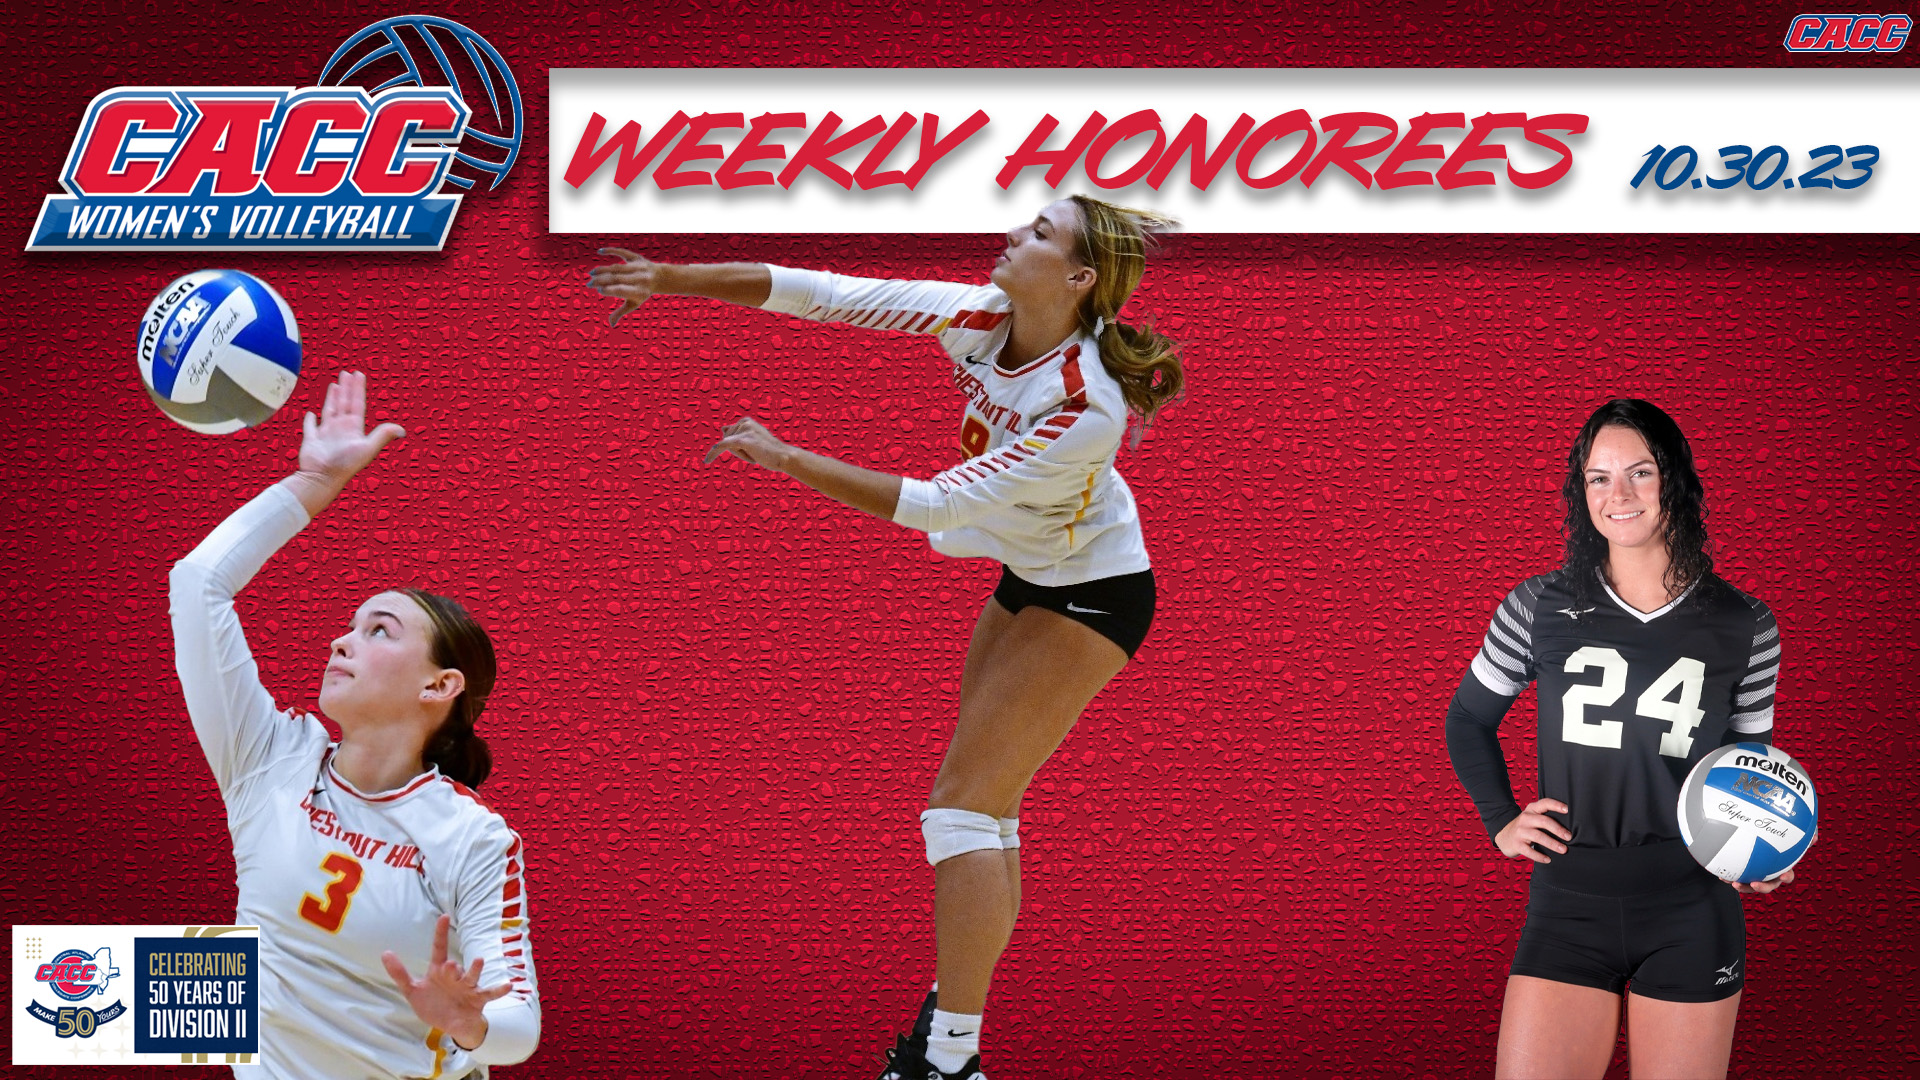 CACC Women's Volleyball Weekly Honorees (10-30-23)